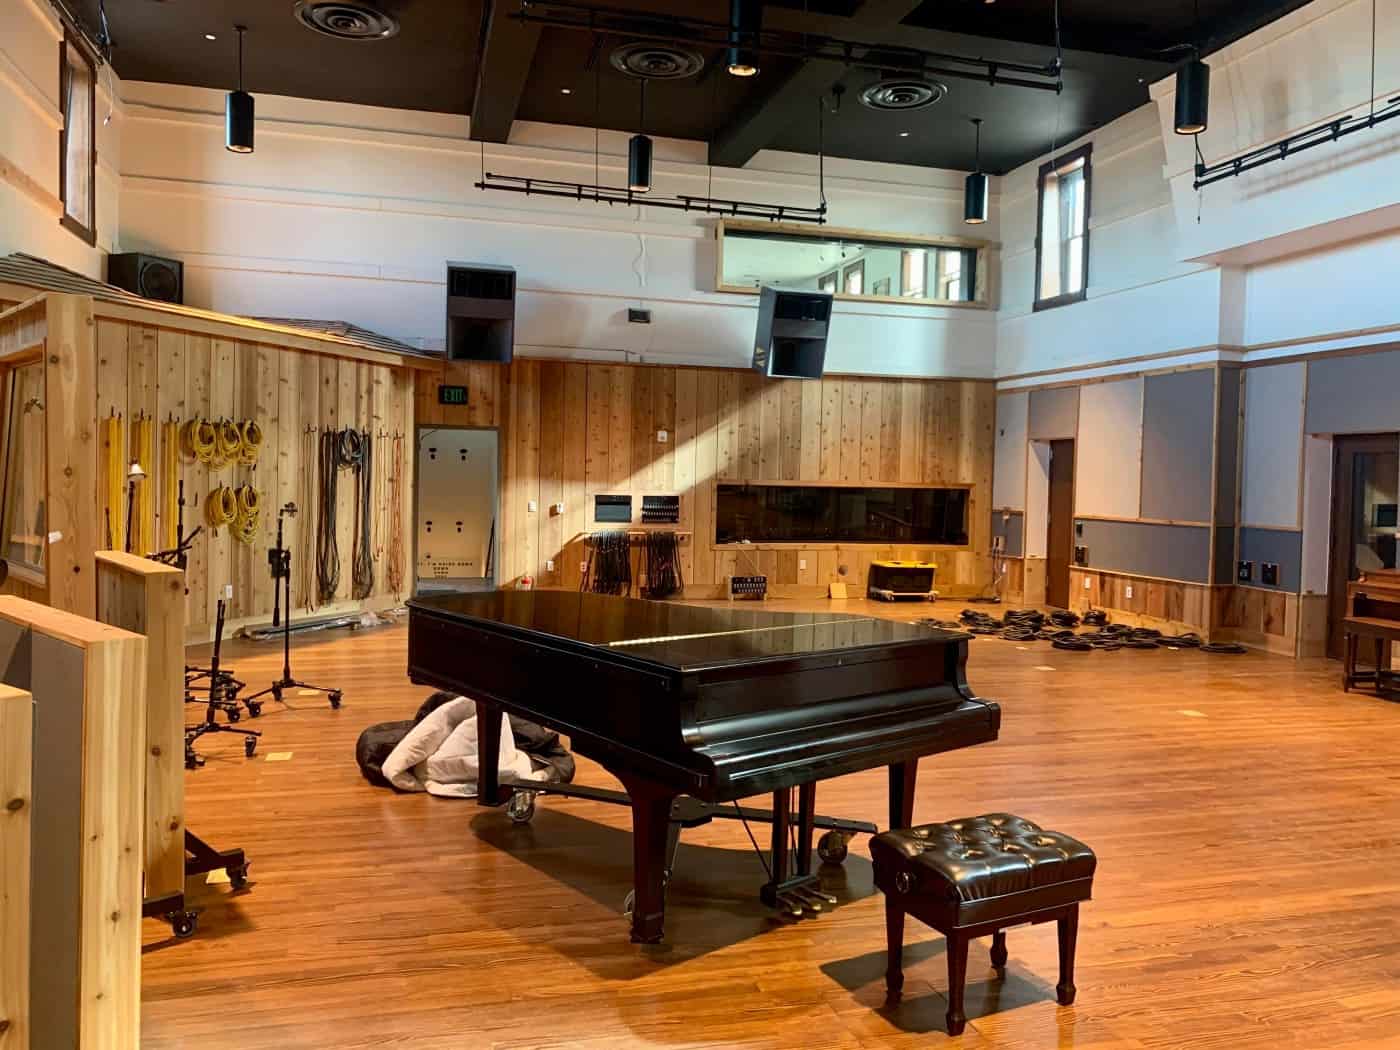 Photo from inside the renovated session room at the Church Studio. The building also includes a room of historical Leon Russell, Shelter Records and Tulsa Sound artifacts, and several other interesting nooks and crannies the staff has plenty of interesting Leon-related stories about.